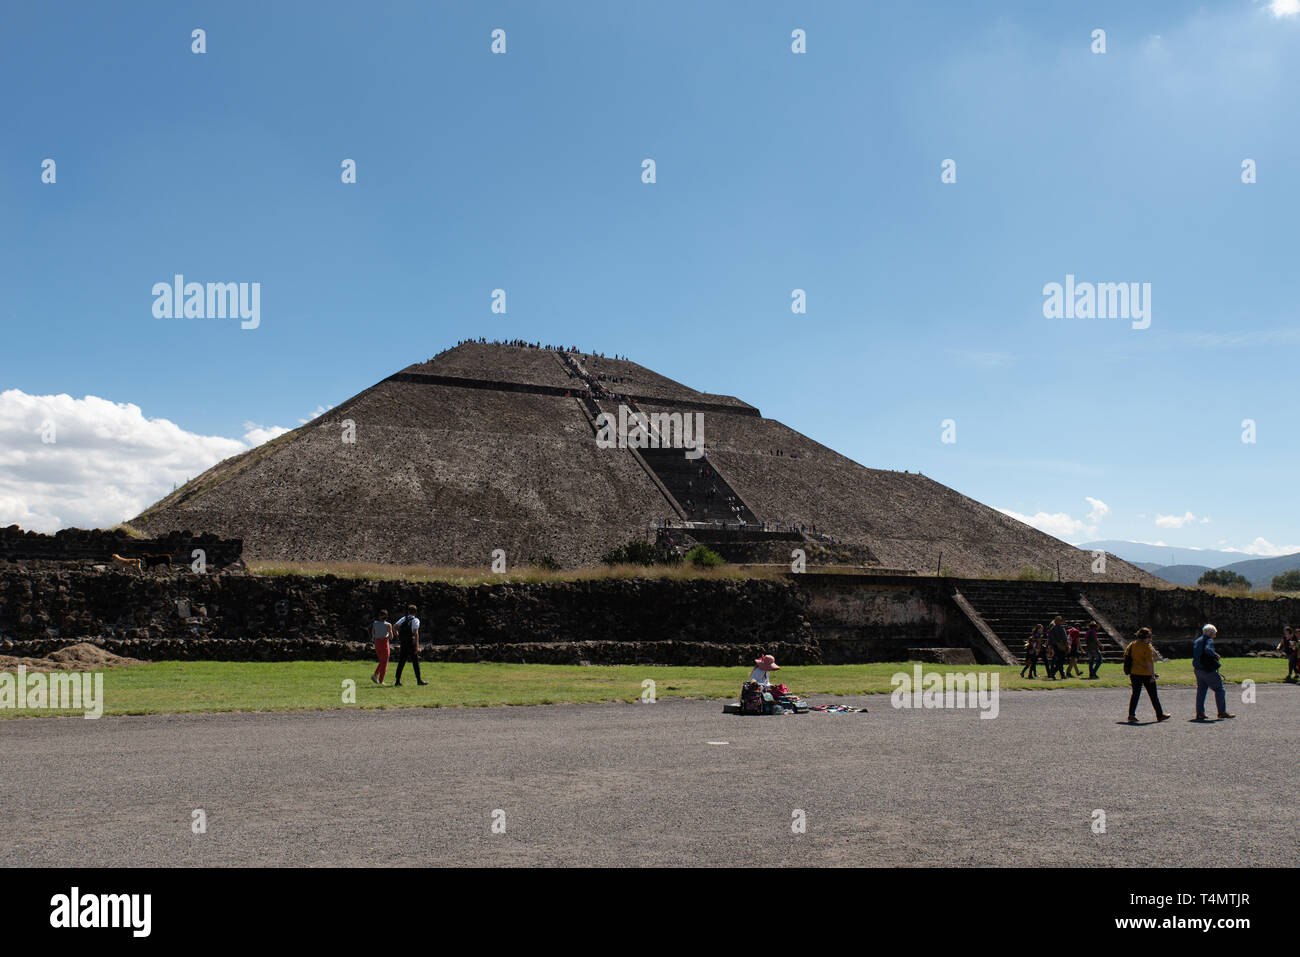 Pyramide der Sonne in Teotihuacan, UNESCO-Weltkulturerbe seit 1987 / Pyramid of the sun in Teotihuacan, a UNESCO World Heritage since 1987, Mexico. Stock Photo